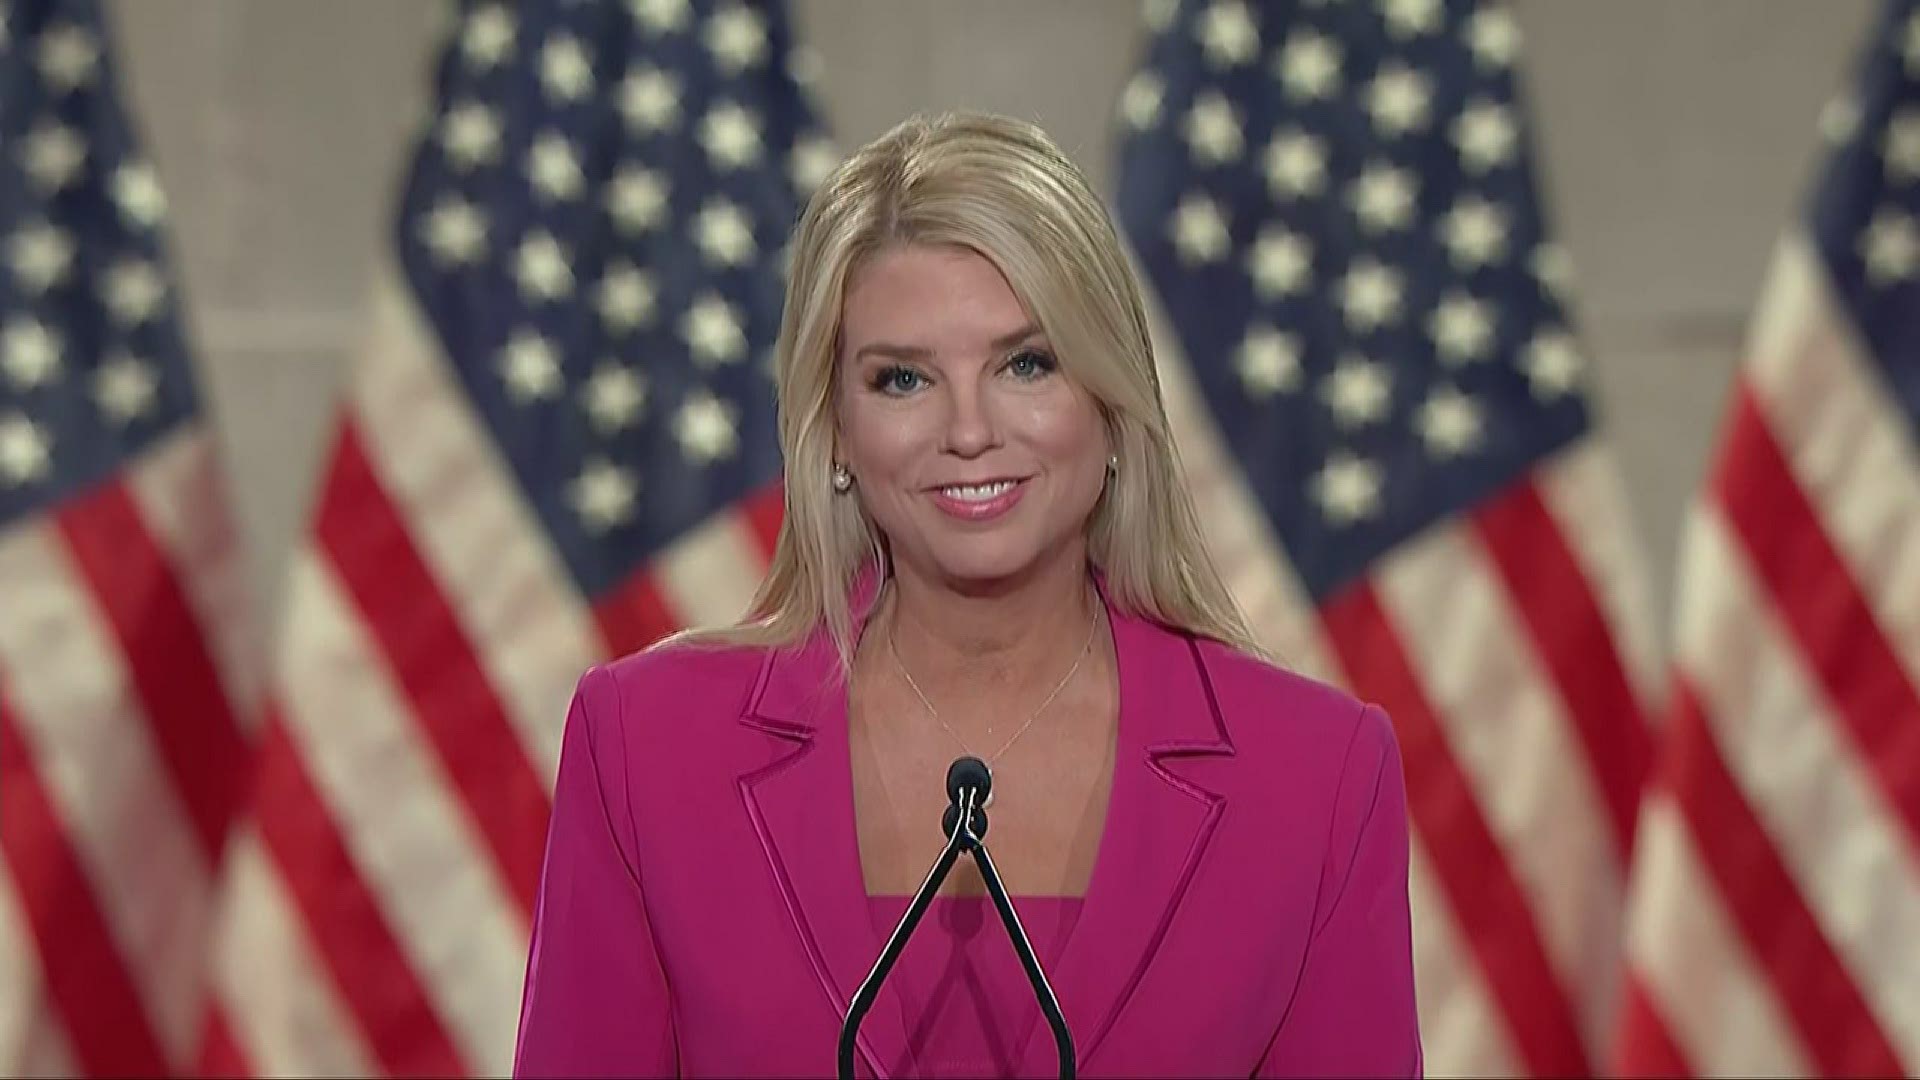 Pam Bondi, the former attorney general of Florida, gave a speech during the second night of the Republican National Convention.